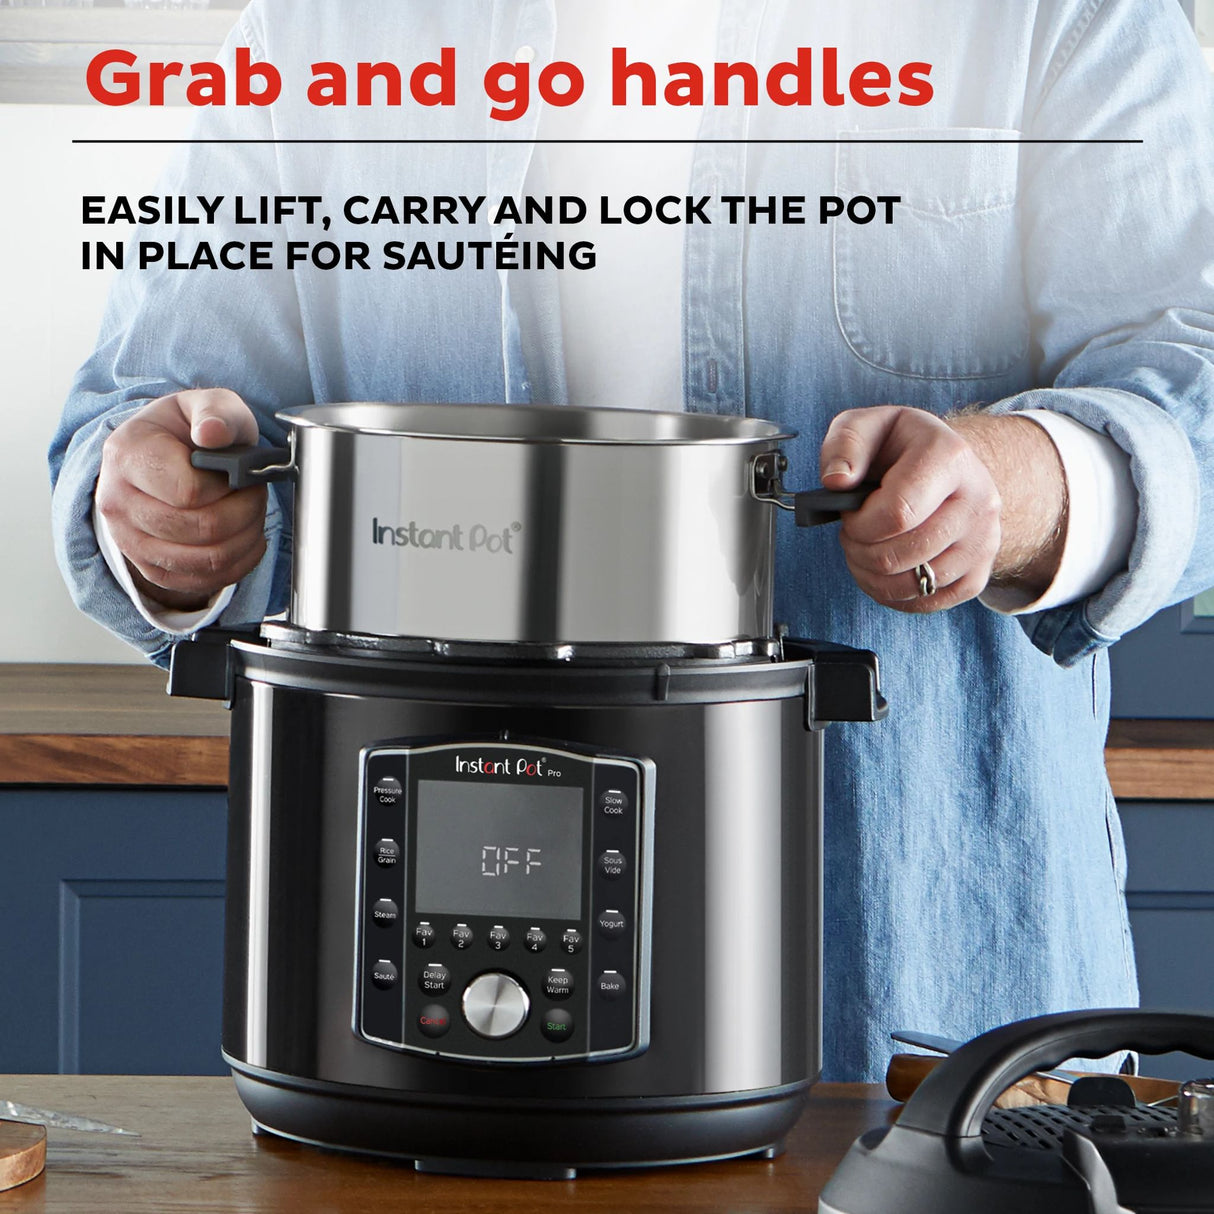  Instant Pot Pro 8 quart multi-use pressure cooker with text Grab and go handles